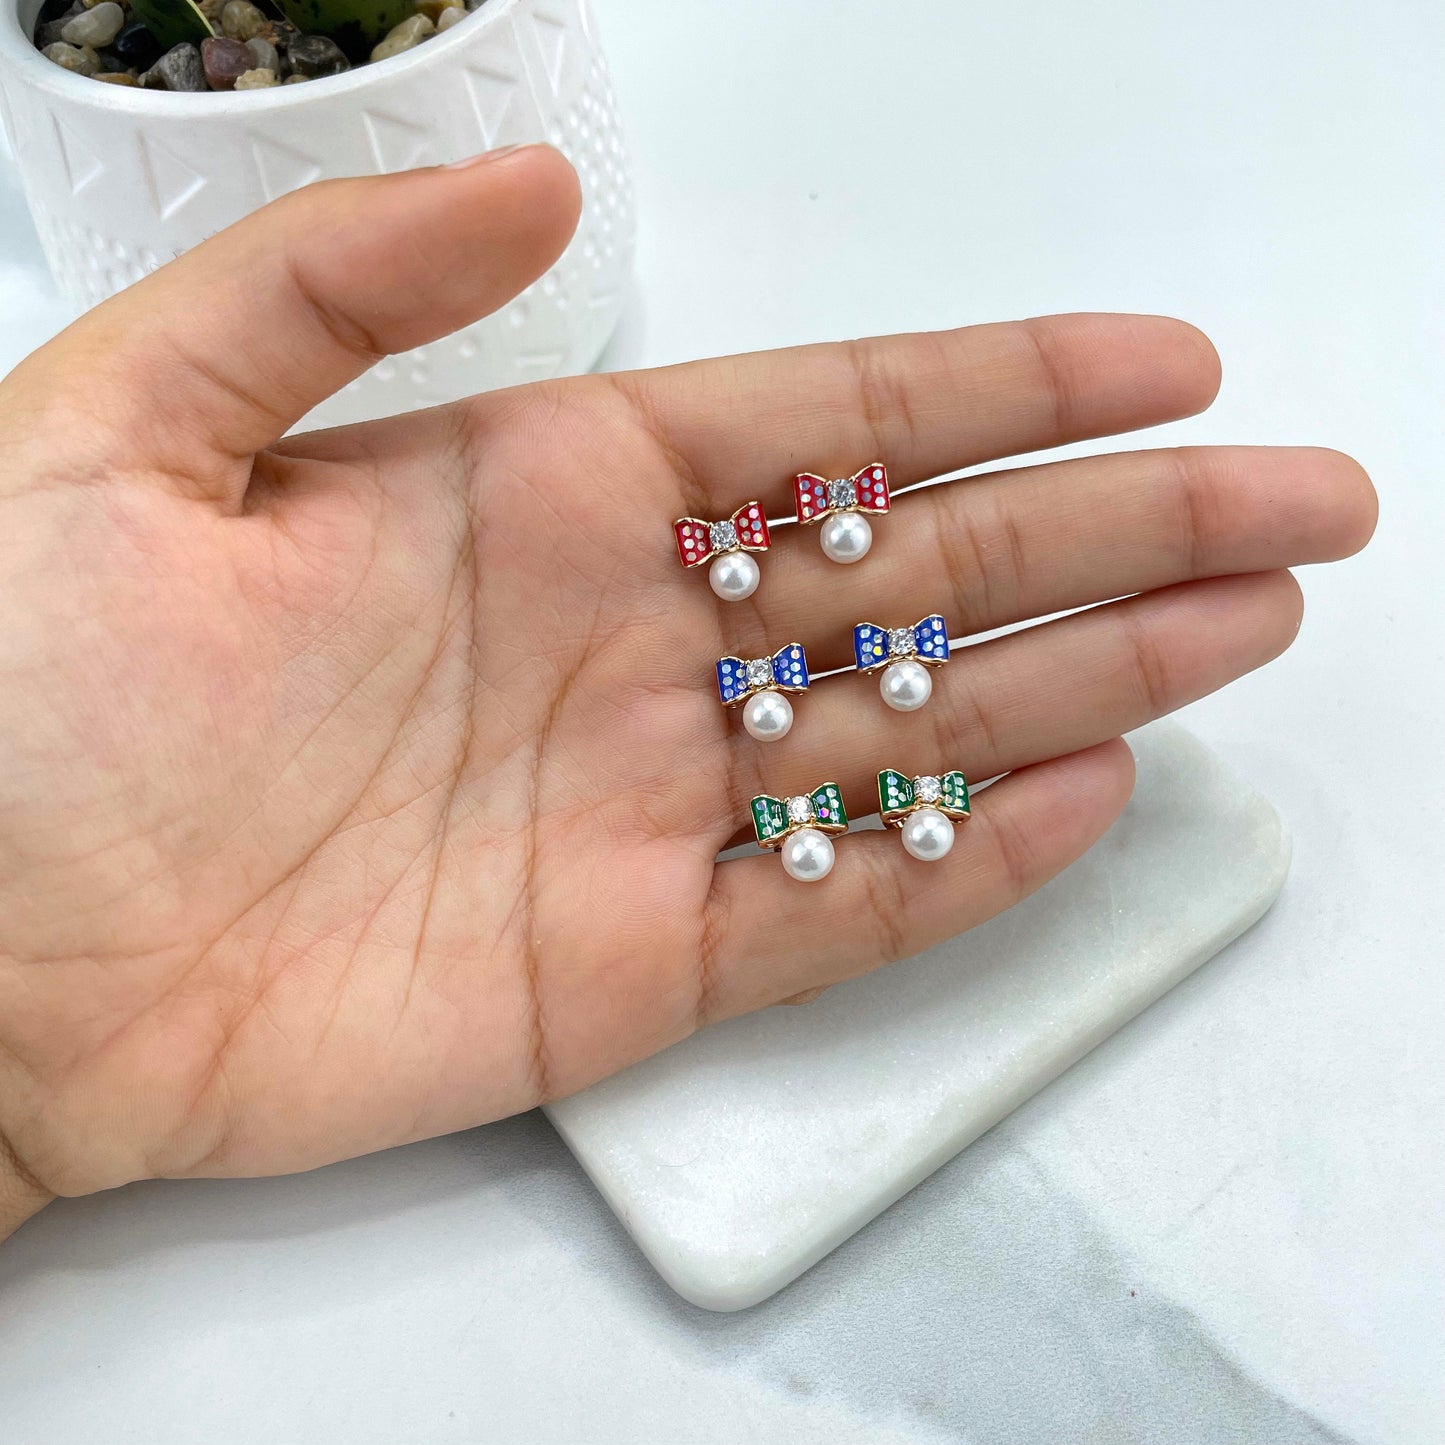 18k Gold Filled Enamel Red, Blue or Green Bow with Pearl & CZ Details Stud Earrings, Romantic Deliciated Vintage Inspo, Wholesale Jewelry